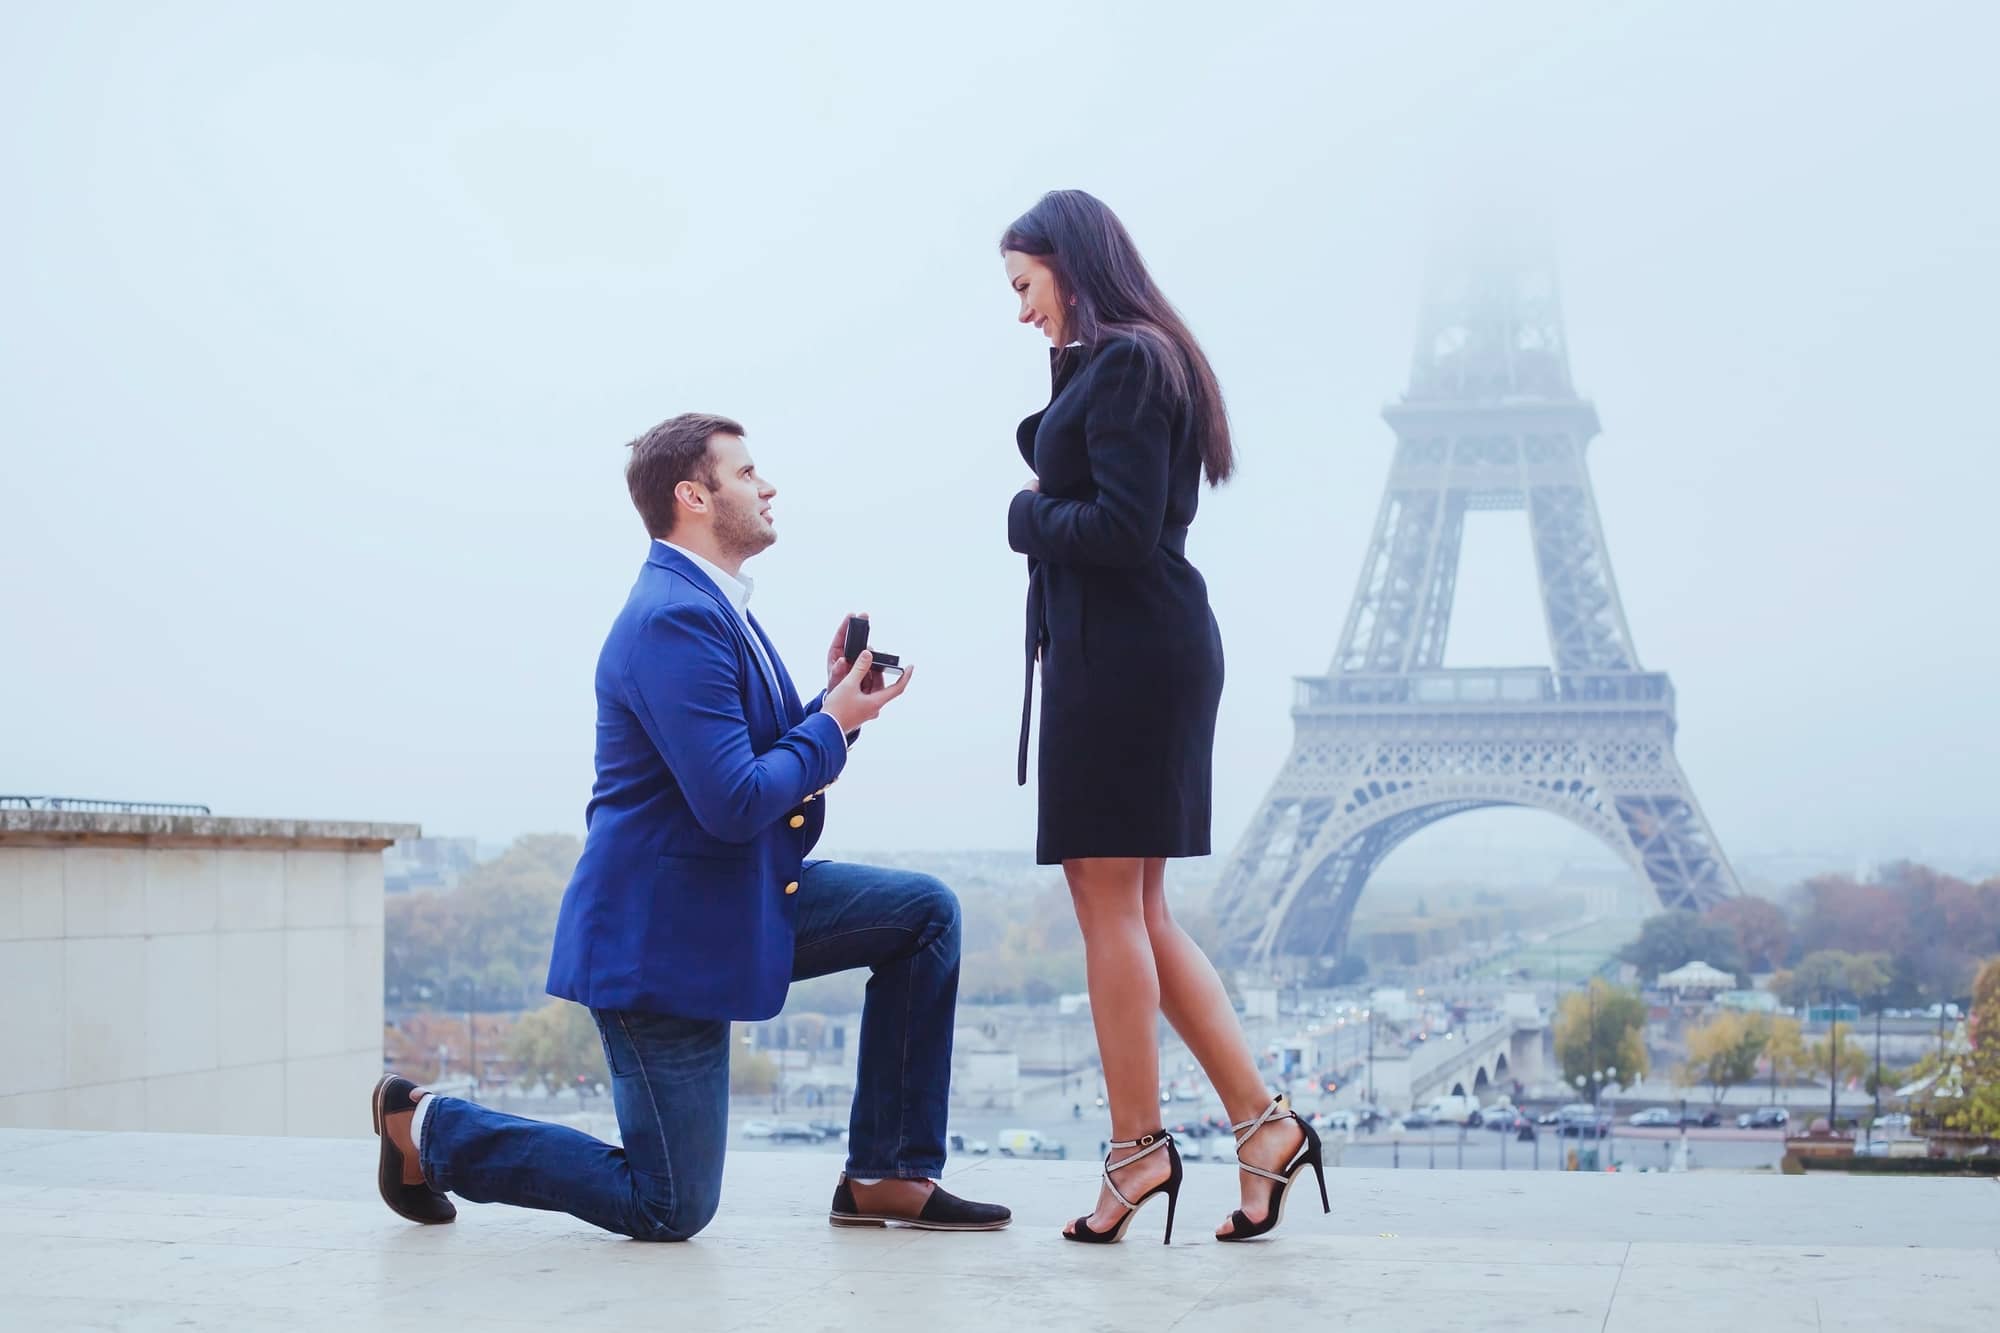 A man gets down on one knee to propose